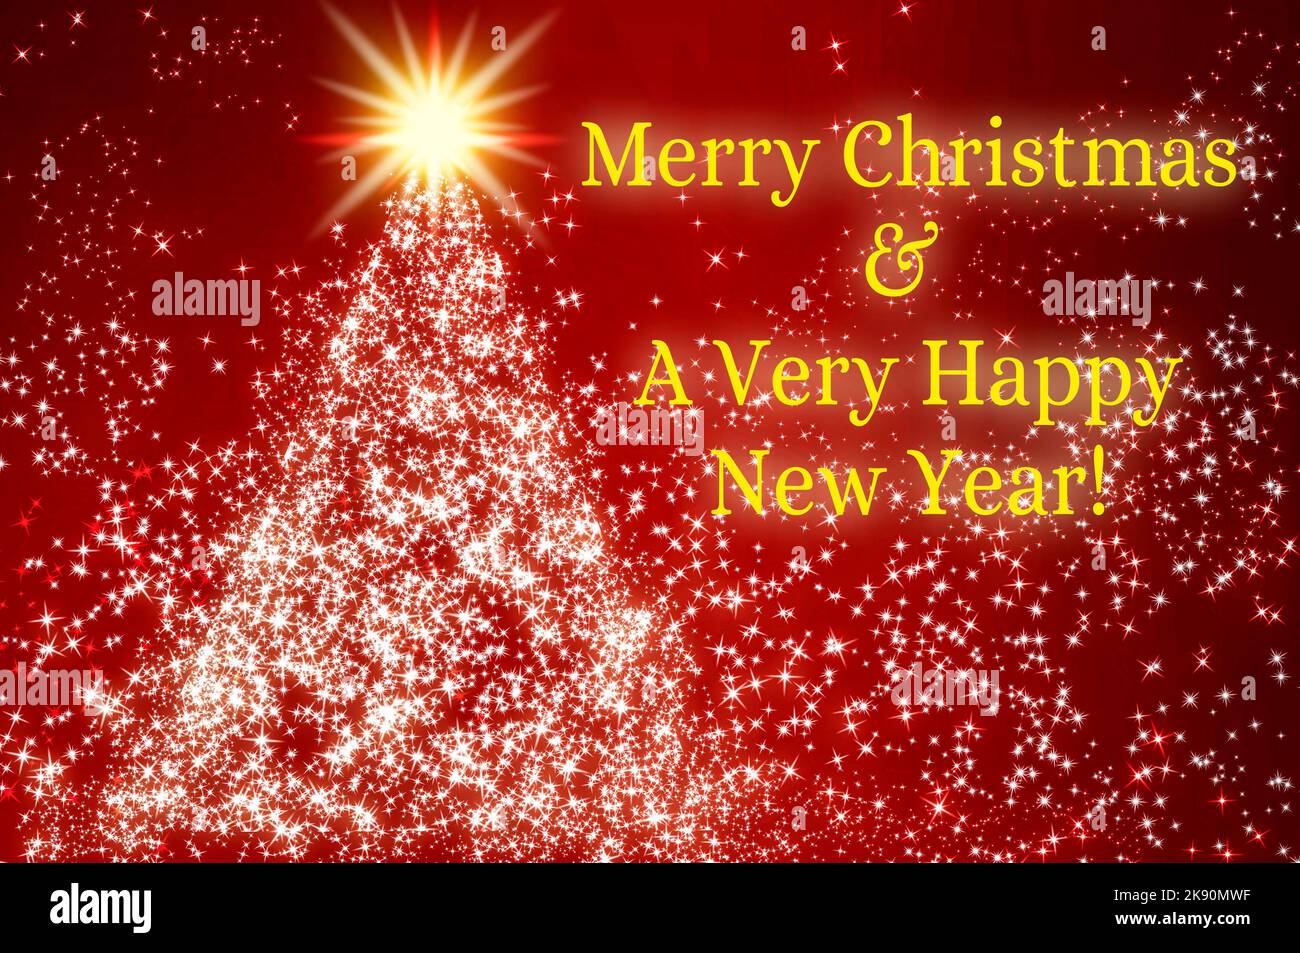 Merry Christmas and a very happy new year text with shining star like pine tree on red background. Christmas celebration concept. Stock Photo